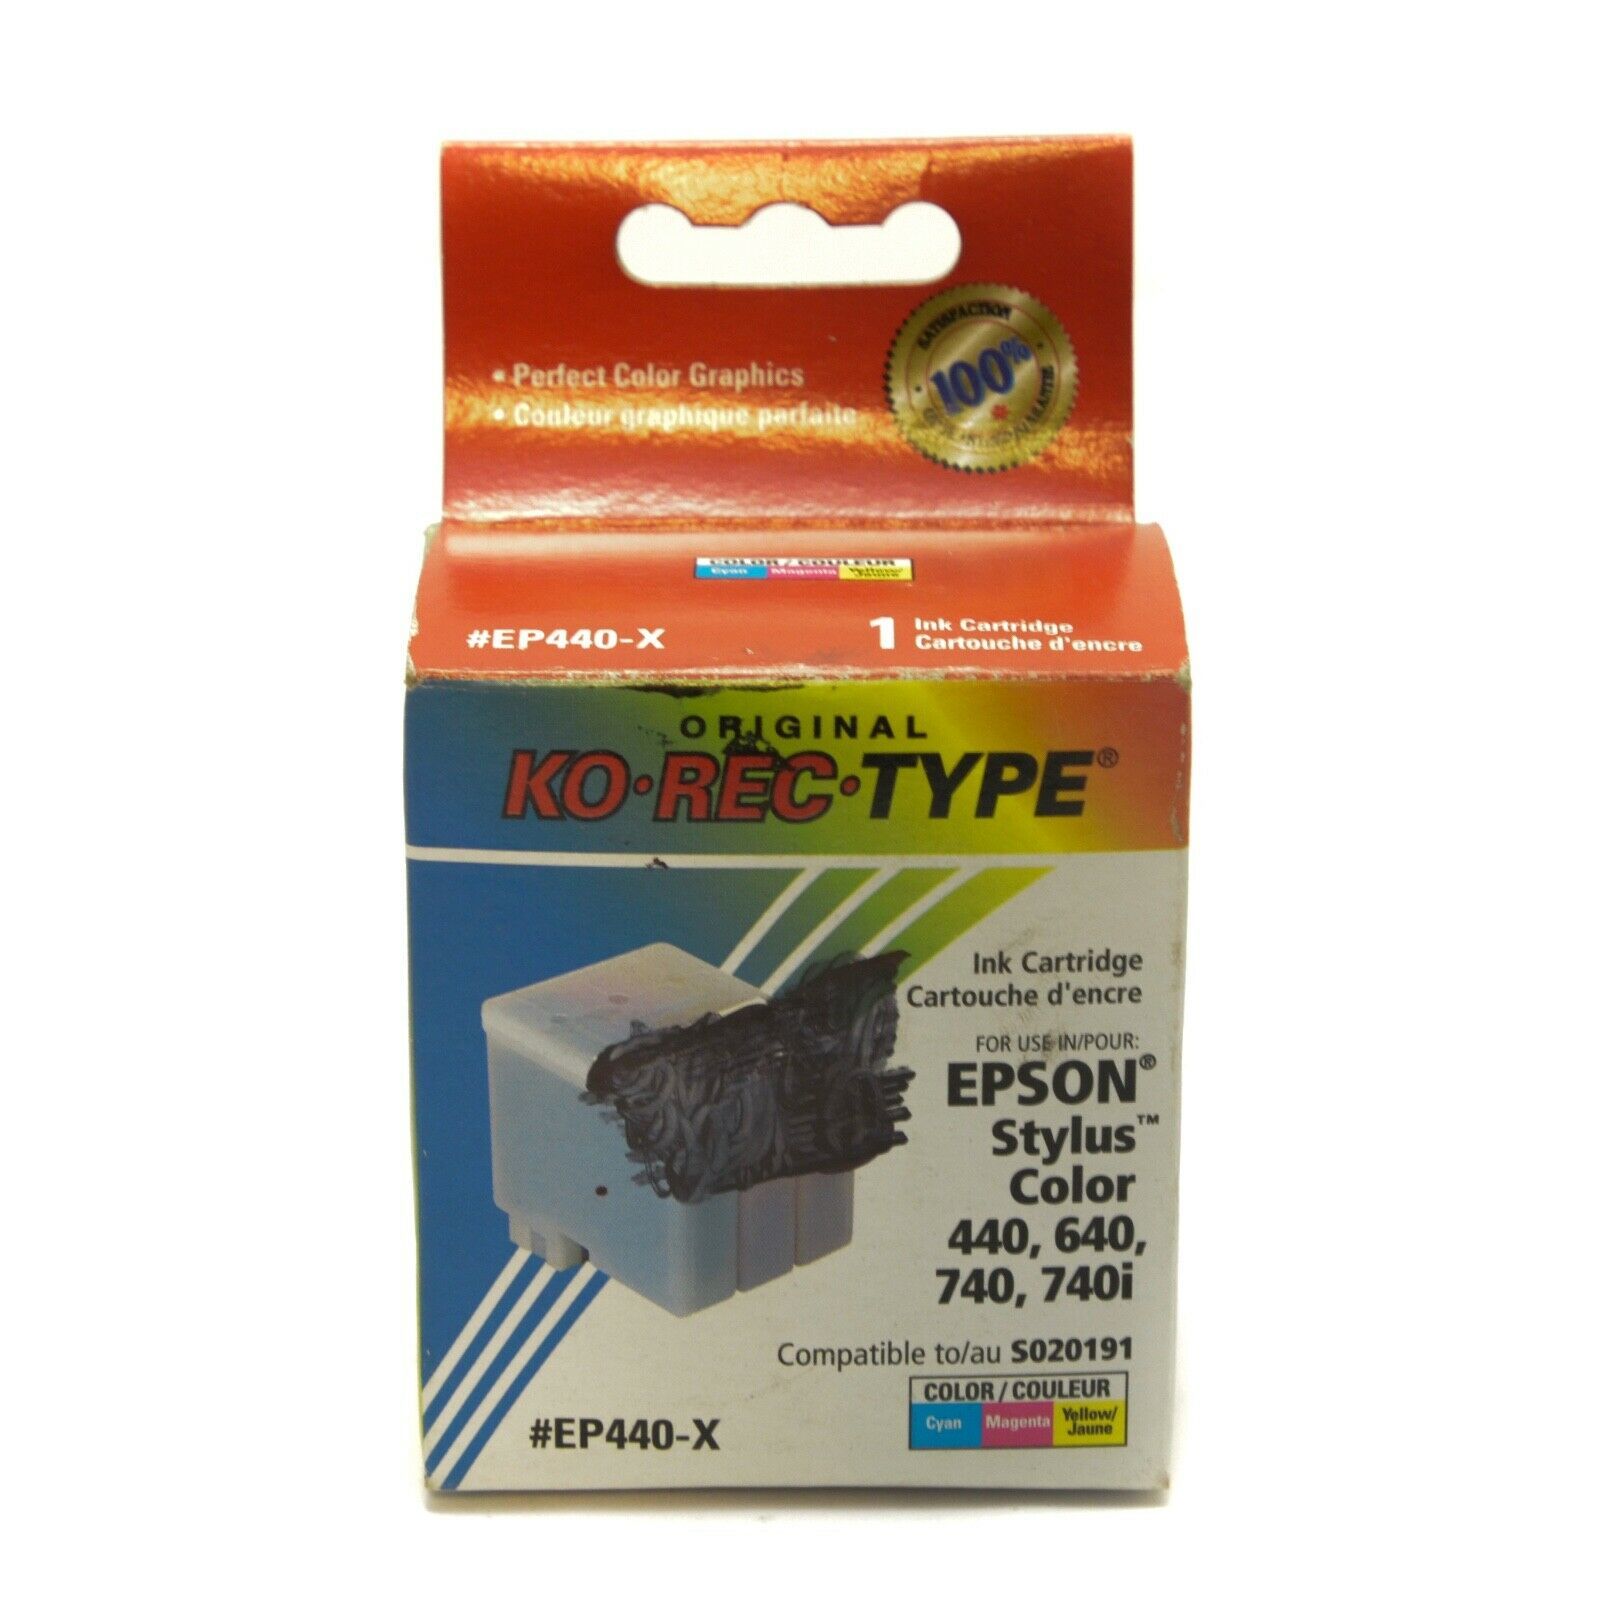 Primary image for KO.REC.TYPE Epson Color Cartridge 440 640 740 Compatible to S020191 #EP440-X